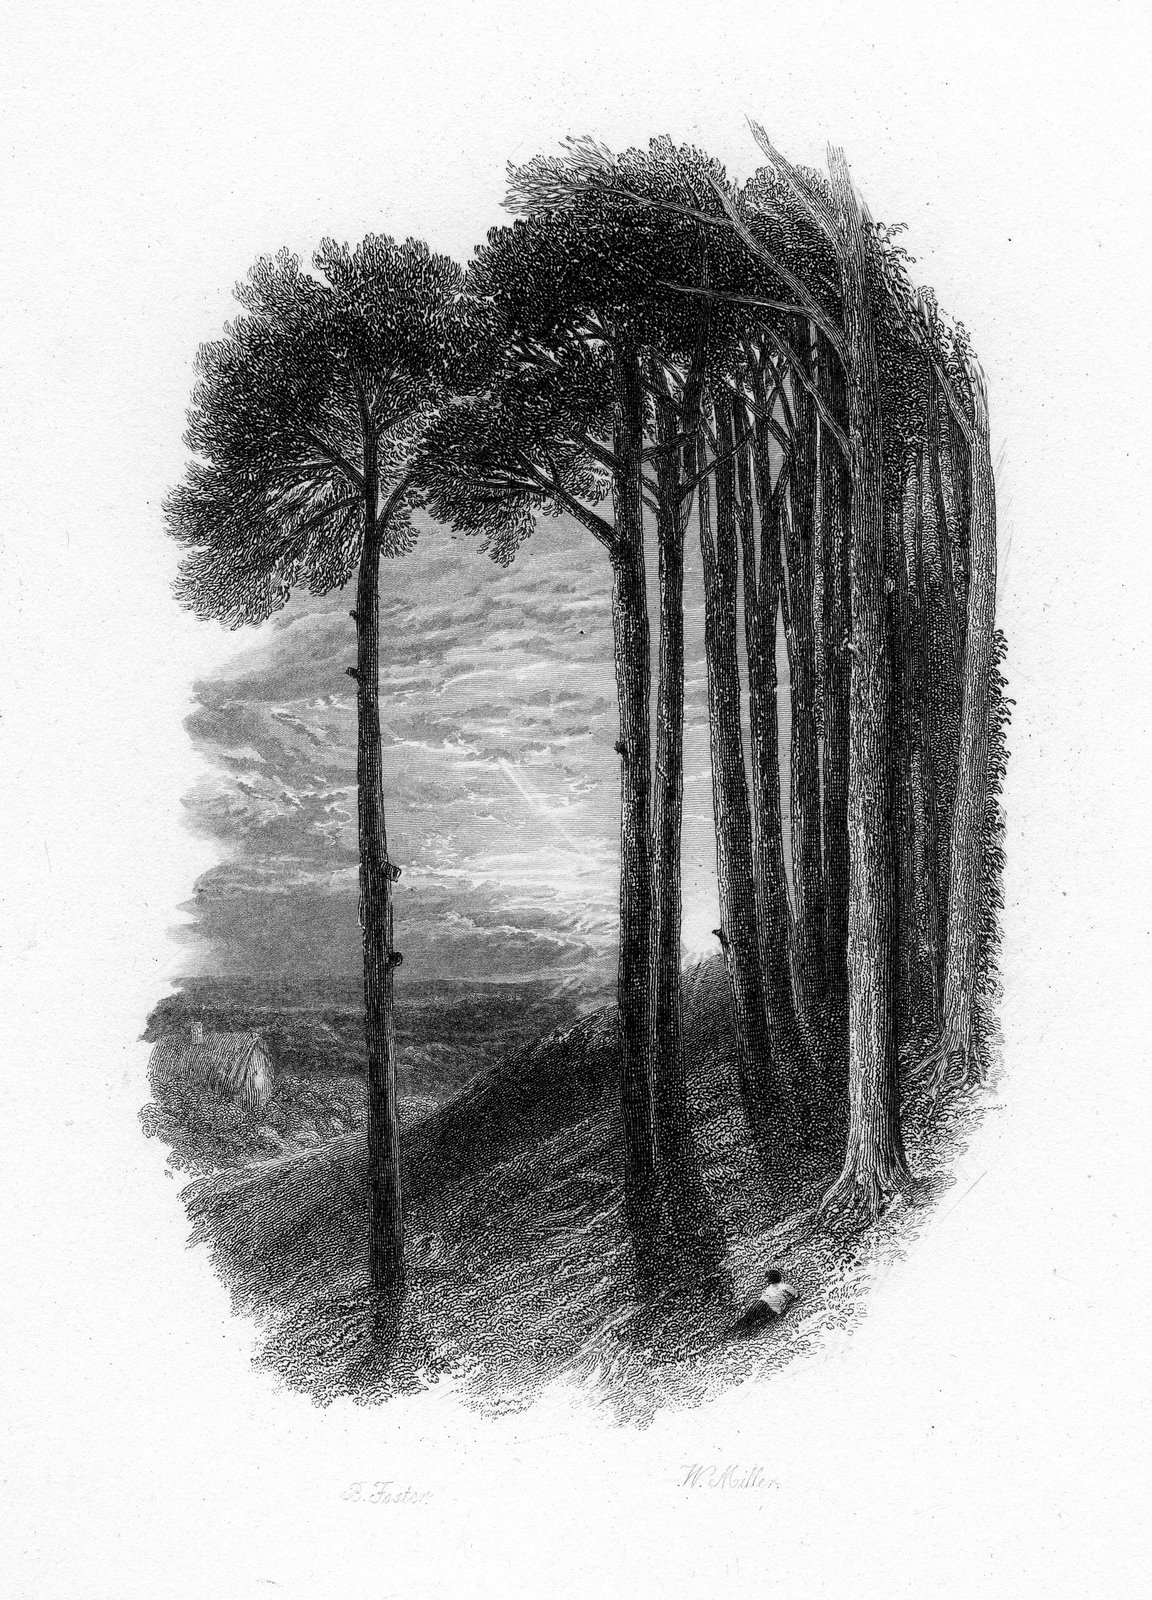 ['I_remember,_I_remember,_The_fir_trees_dark_and_high'_engraving_by_William_Miller_after_Birket_Foster.jpg]